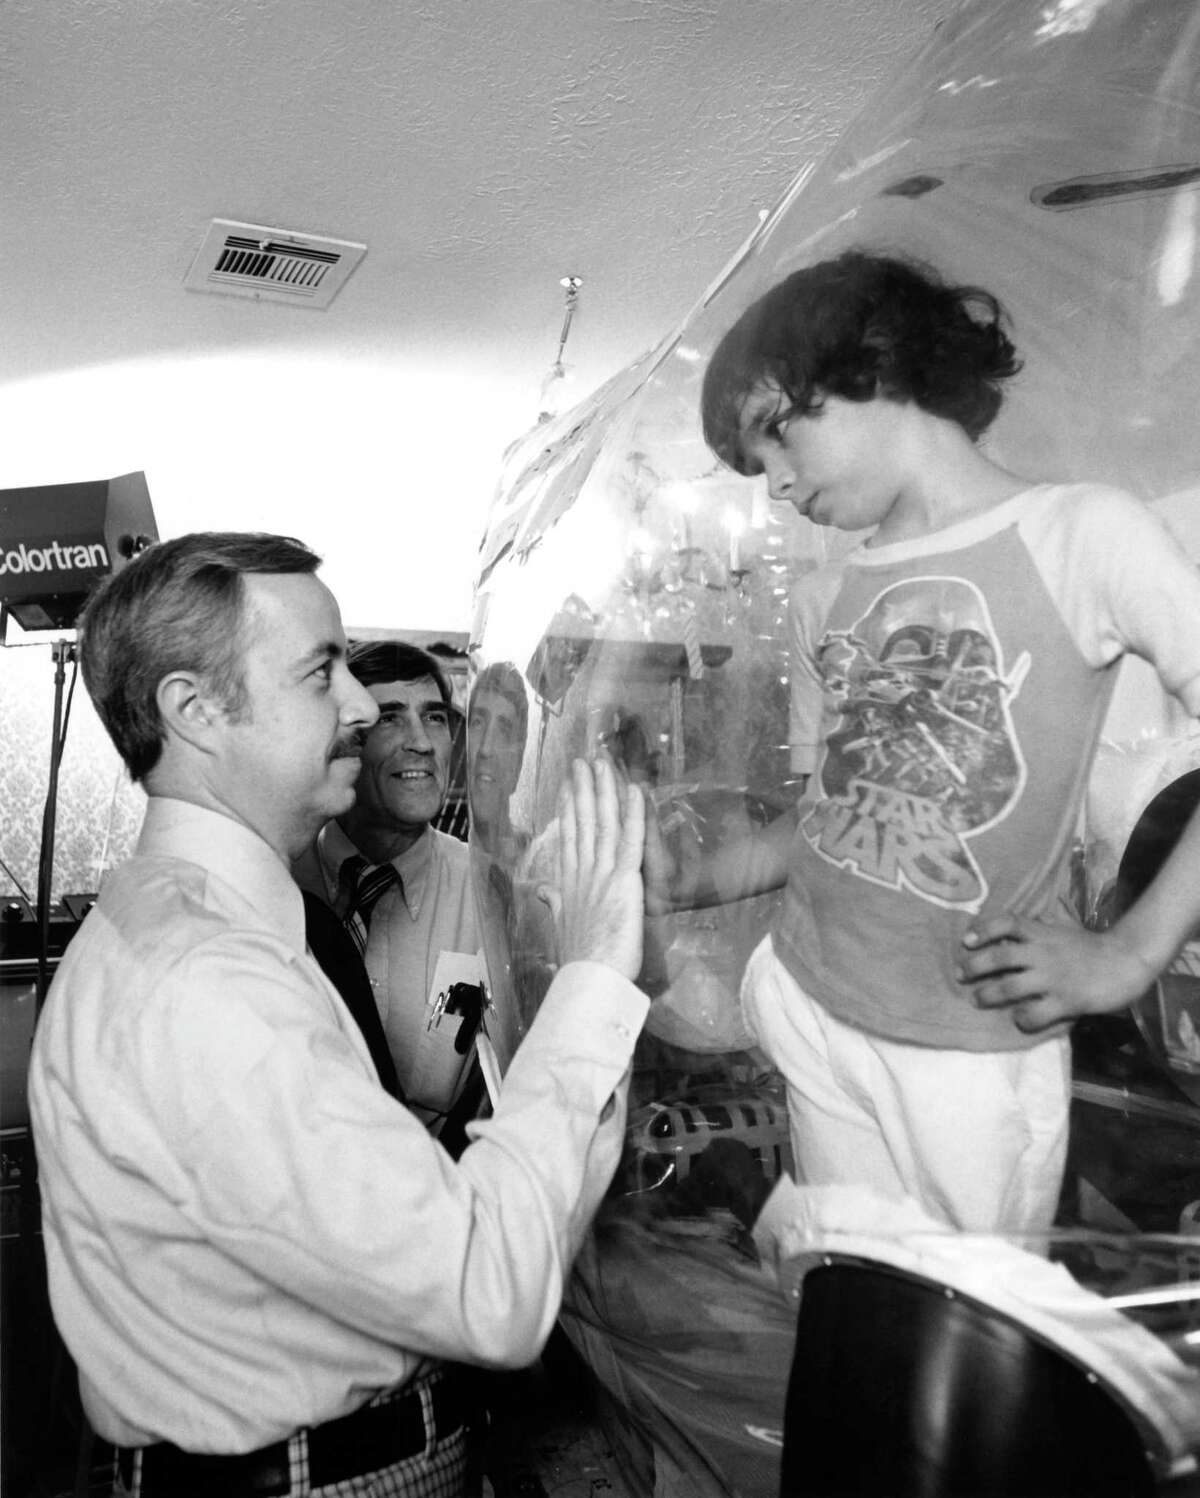 Dr. William Shearer visits with his patient, David Vetter, at Texas Children's Hospital in 1979.